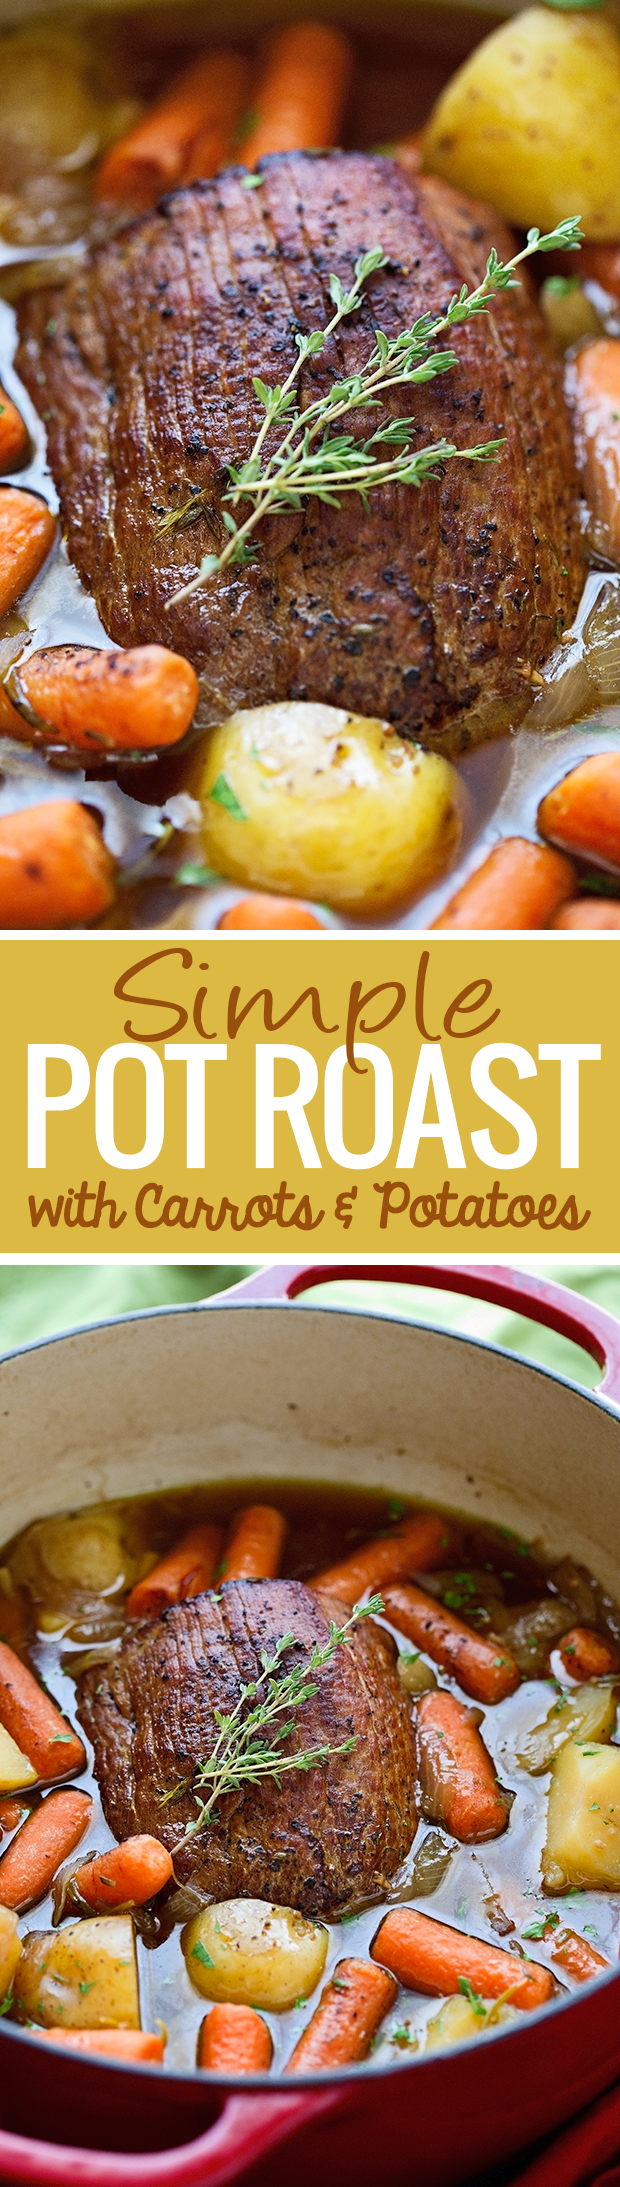 Pot Roast with Carrots and Potatoes - a simple recipe for pot roast that tastes like a french onion soup! The meat is tender and delicious and it requires a simple 15 minutes of presswork! #potroast #roast #beefroast | Littlespicejar.com @littlespicejar